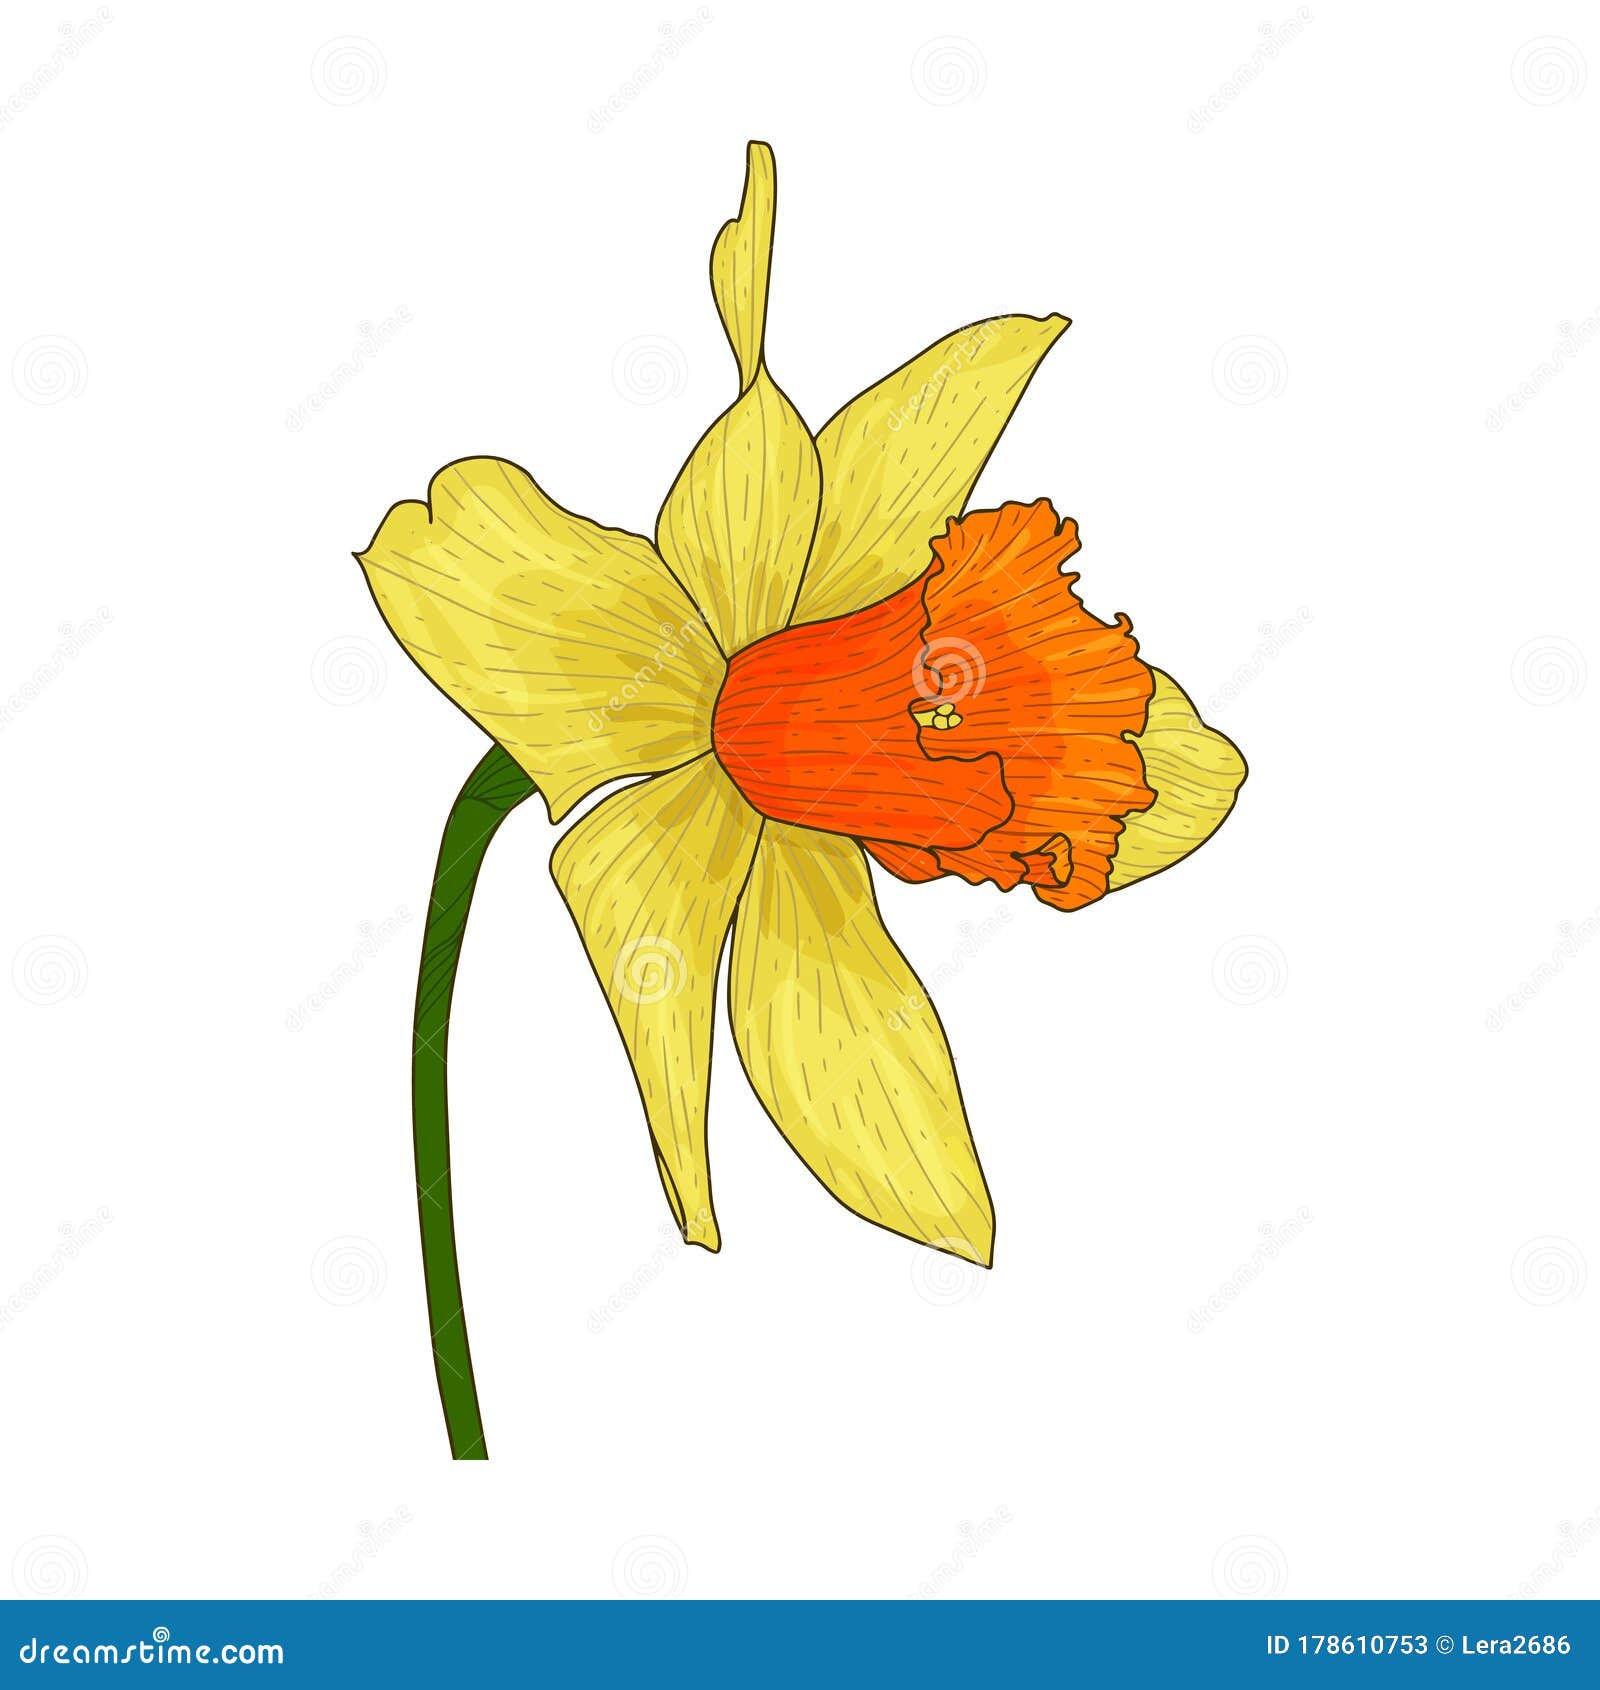 Beautiful Blooming Daffodil Flower. Yellow Petals with an Orange Core ...